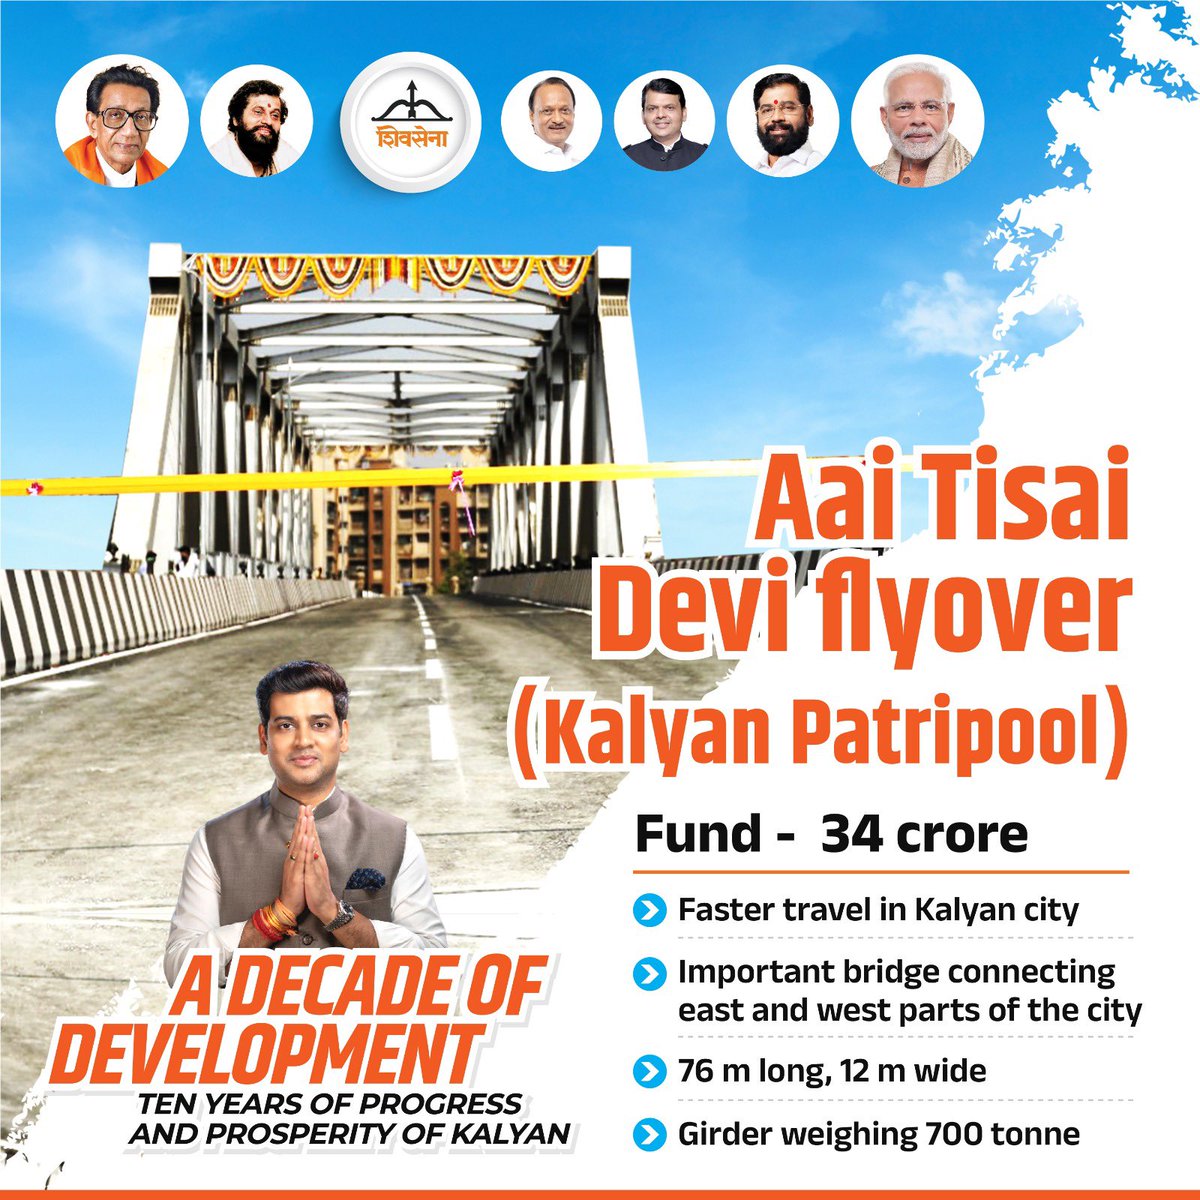 Aai Tisai Devi flyover, also known as, Patripool is an important bridge connecting the eastern and western sides of Kalyan city. This bridge, constructed during British era, has been demolished and reconstructed using modern methods. The newly built flyover is proving to be a